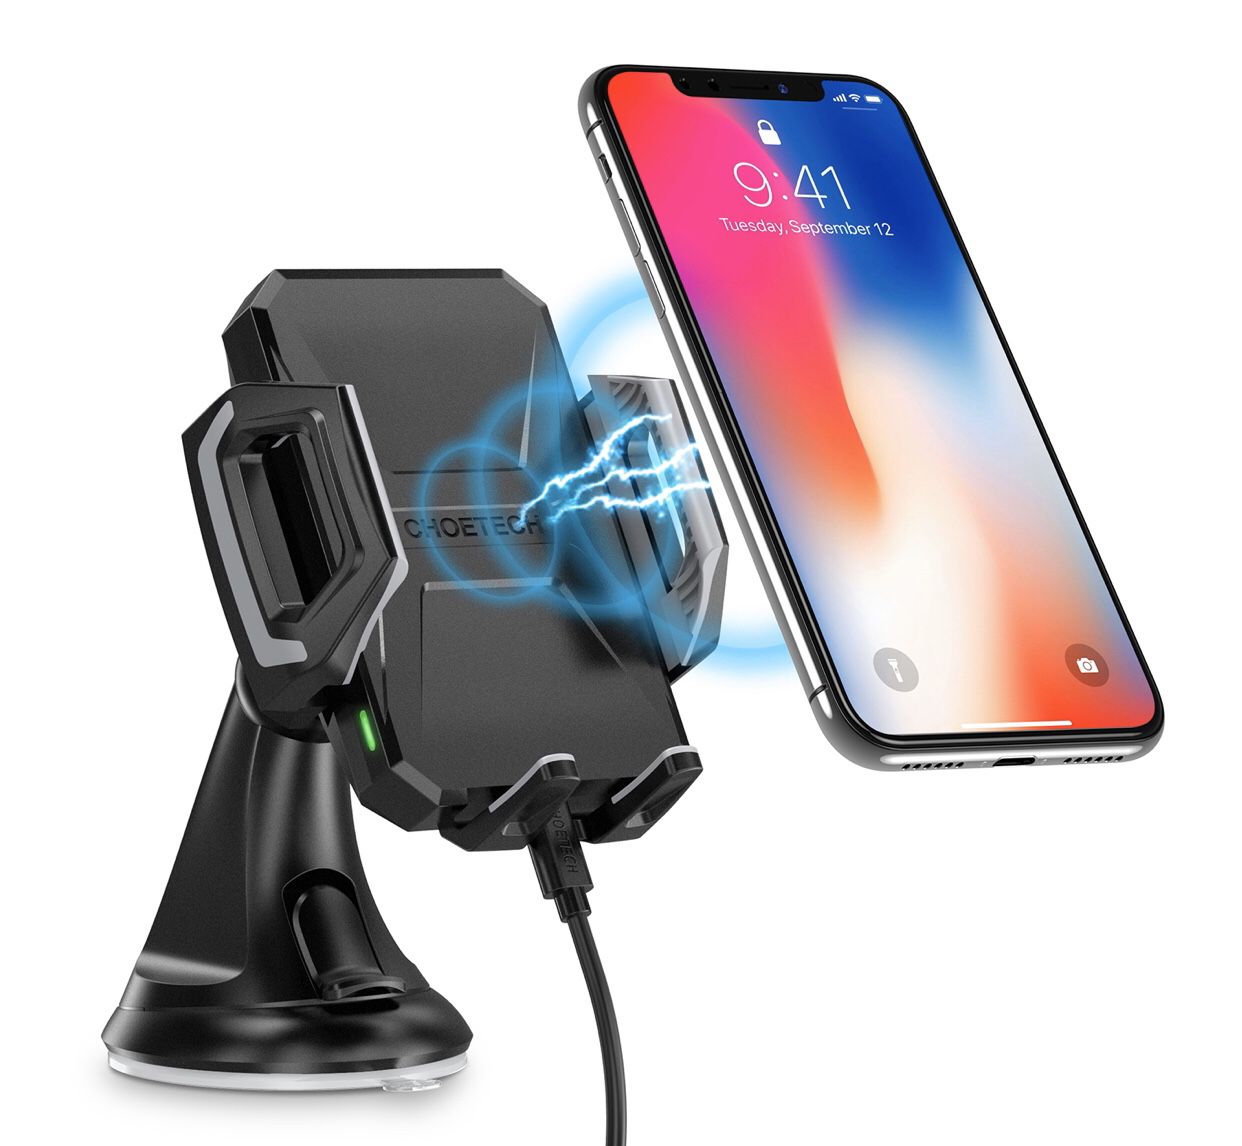 Wireless charger, CHOETECH Cell Phones Accessories Car Mount, Air Vent Phone Holder 10W Charge for Samsung Galaxy S8, S7/S7 Edge, Note 8 5 and 5W Sta